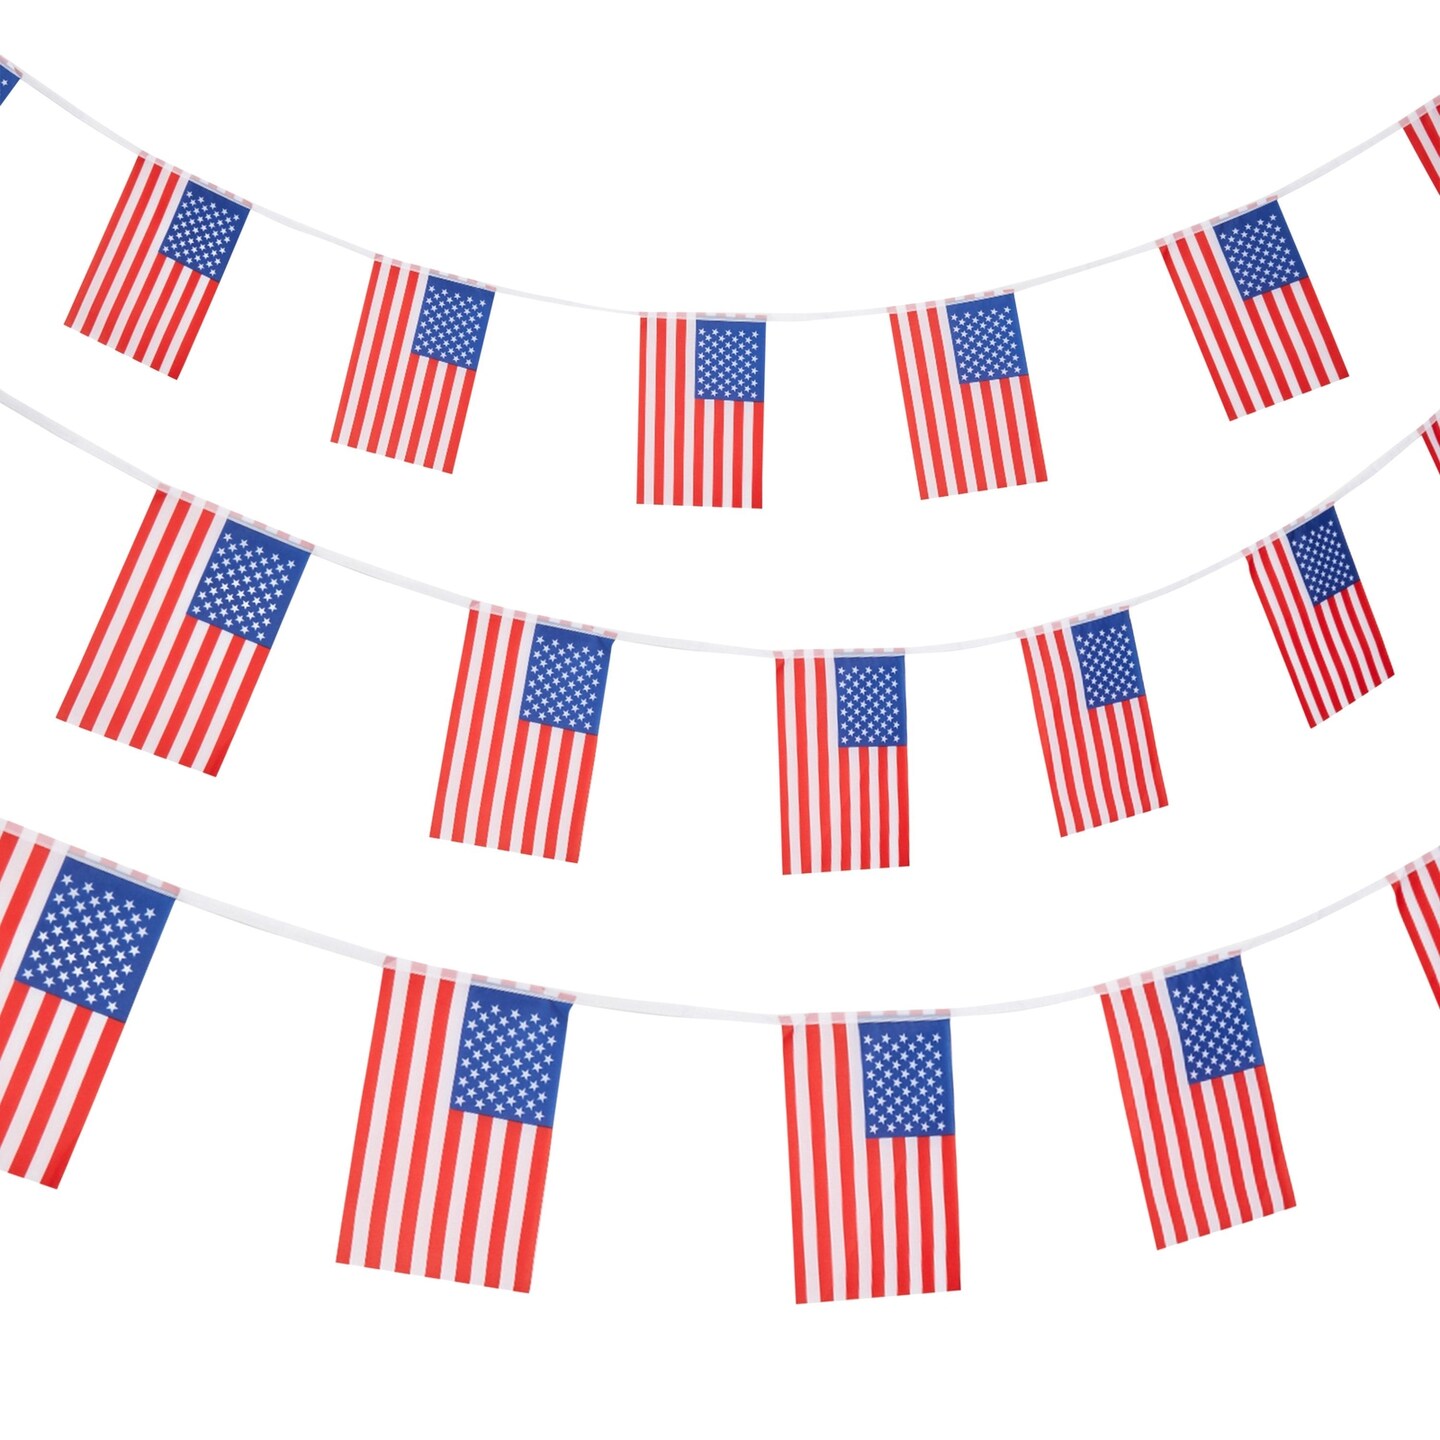 2 Pack Patriotic American Flag Decorations Bunting Banner for 4th of July (26 feet)